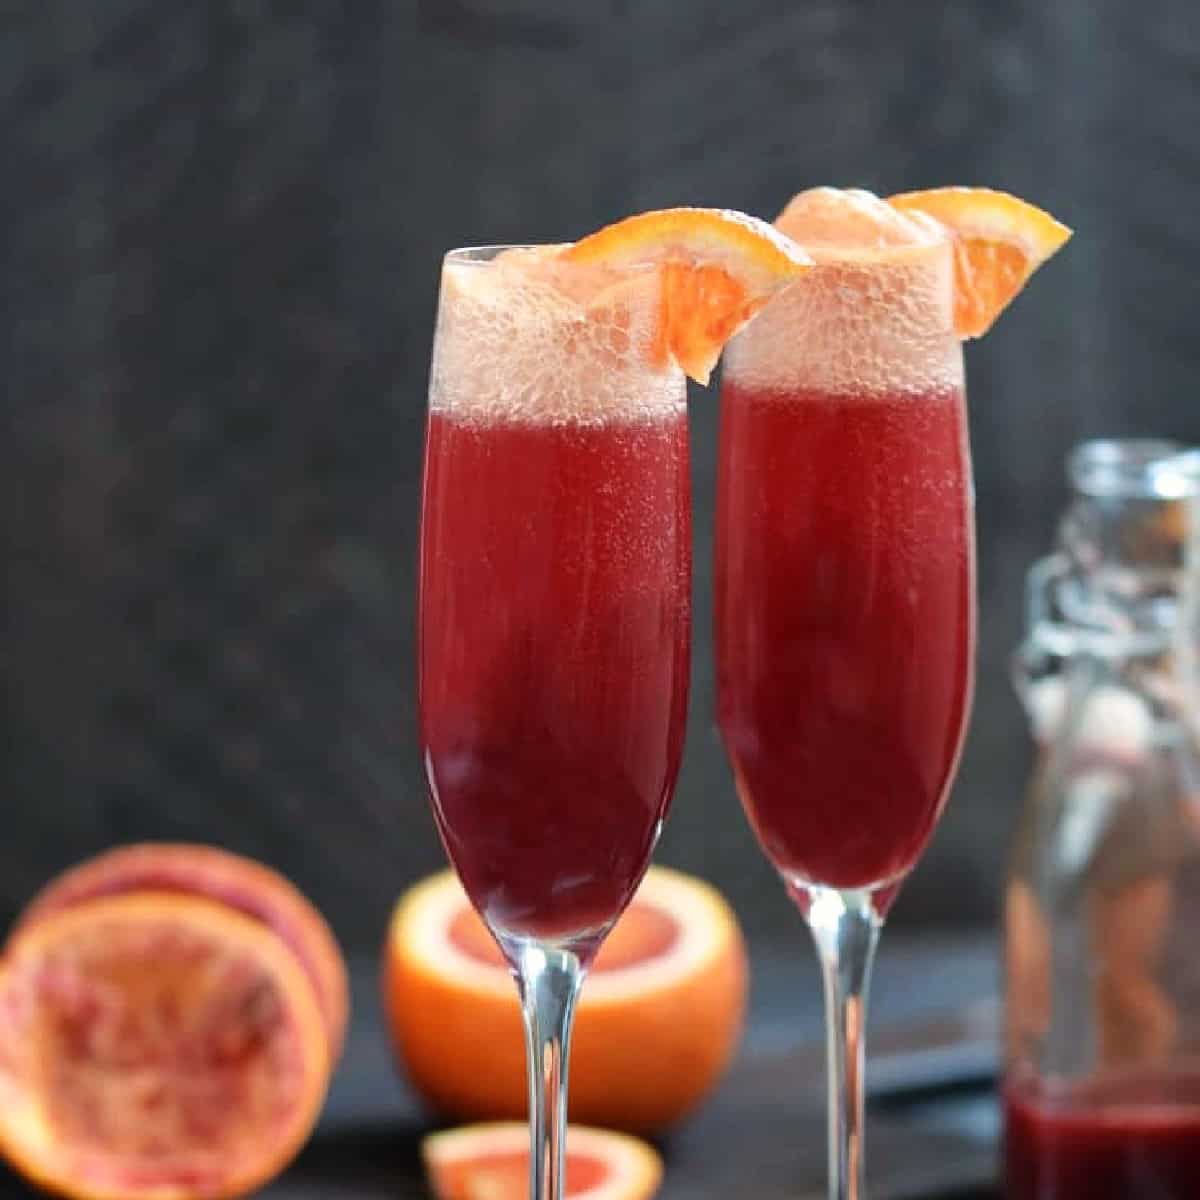 Two champagne flutes filled with blood orange mimosa with an orange garnish.